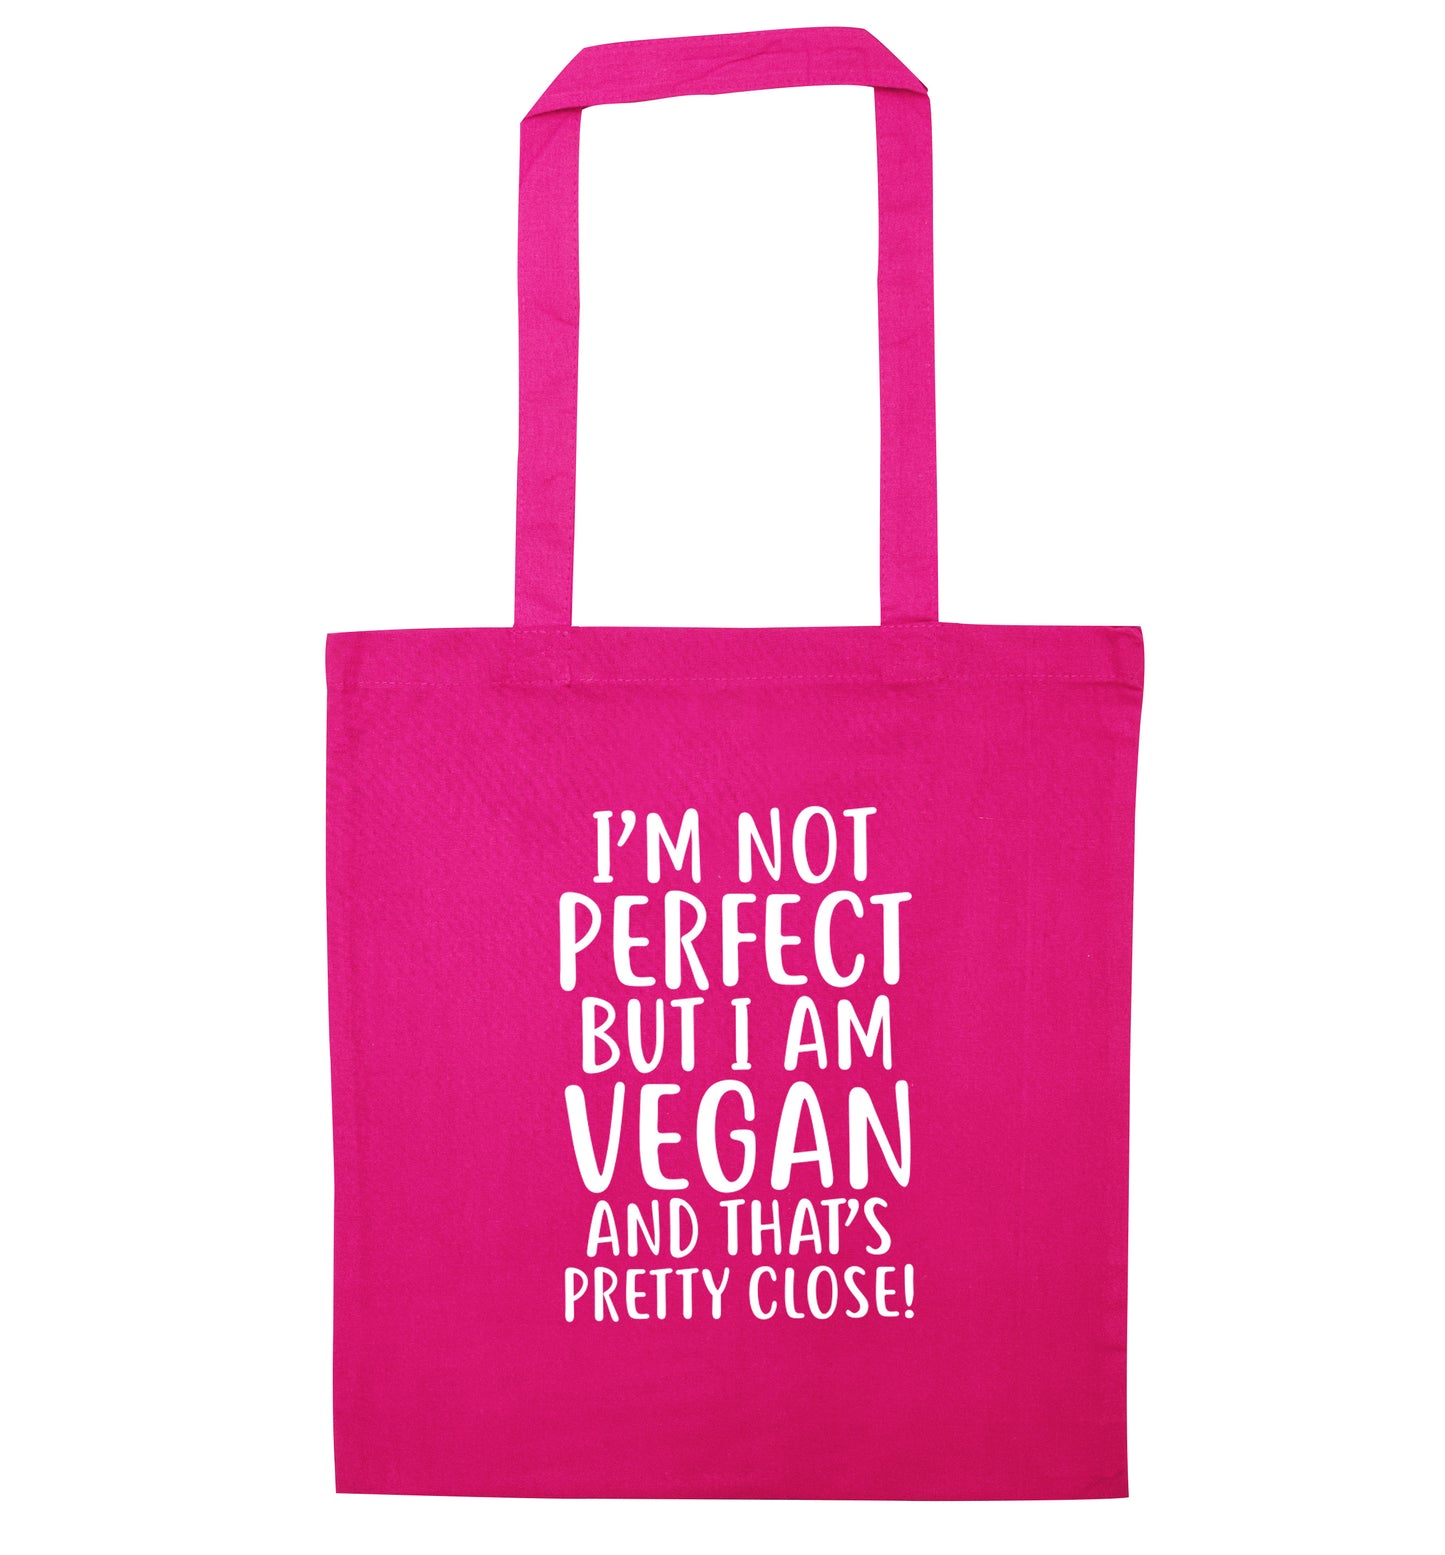 Might not be perfect but I am vegan pink tote bag